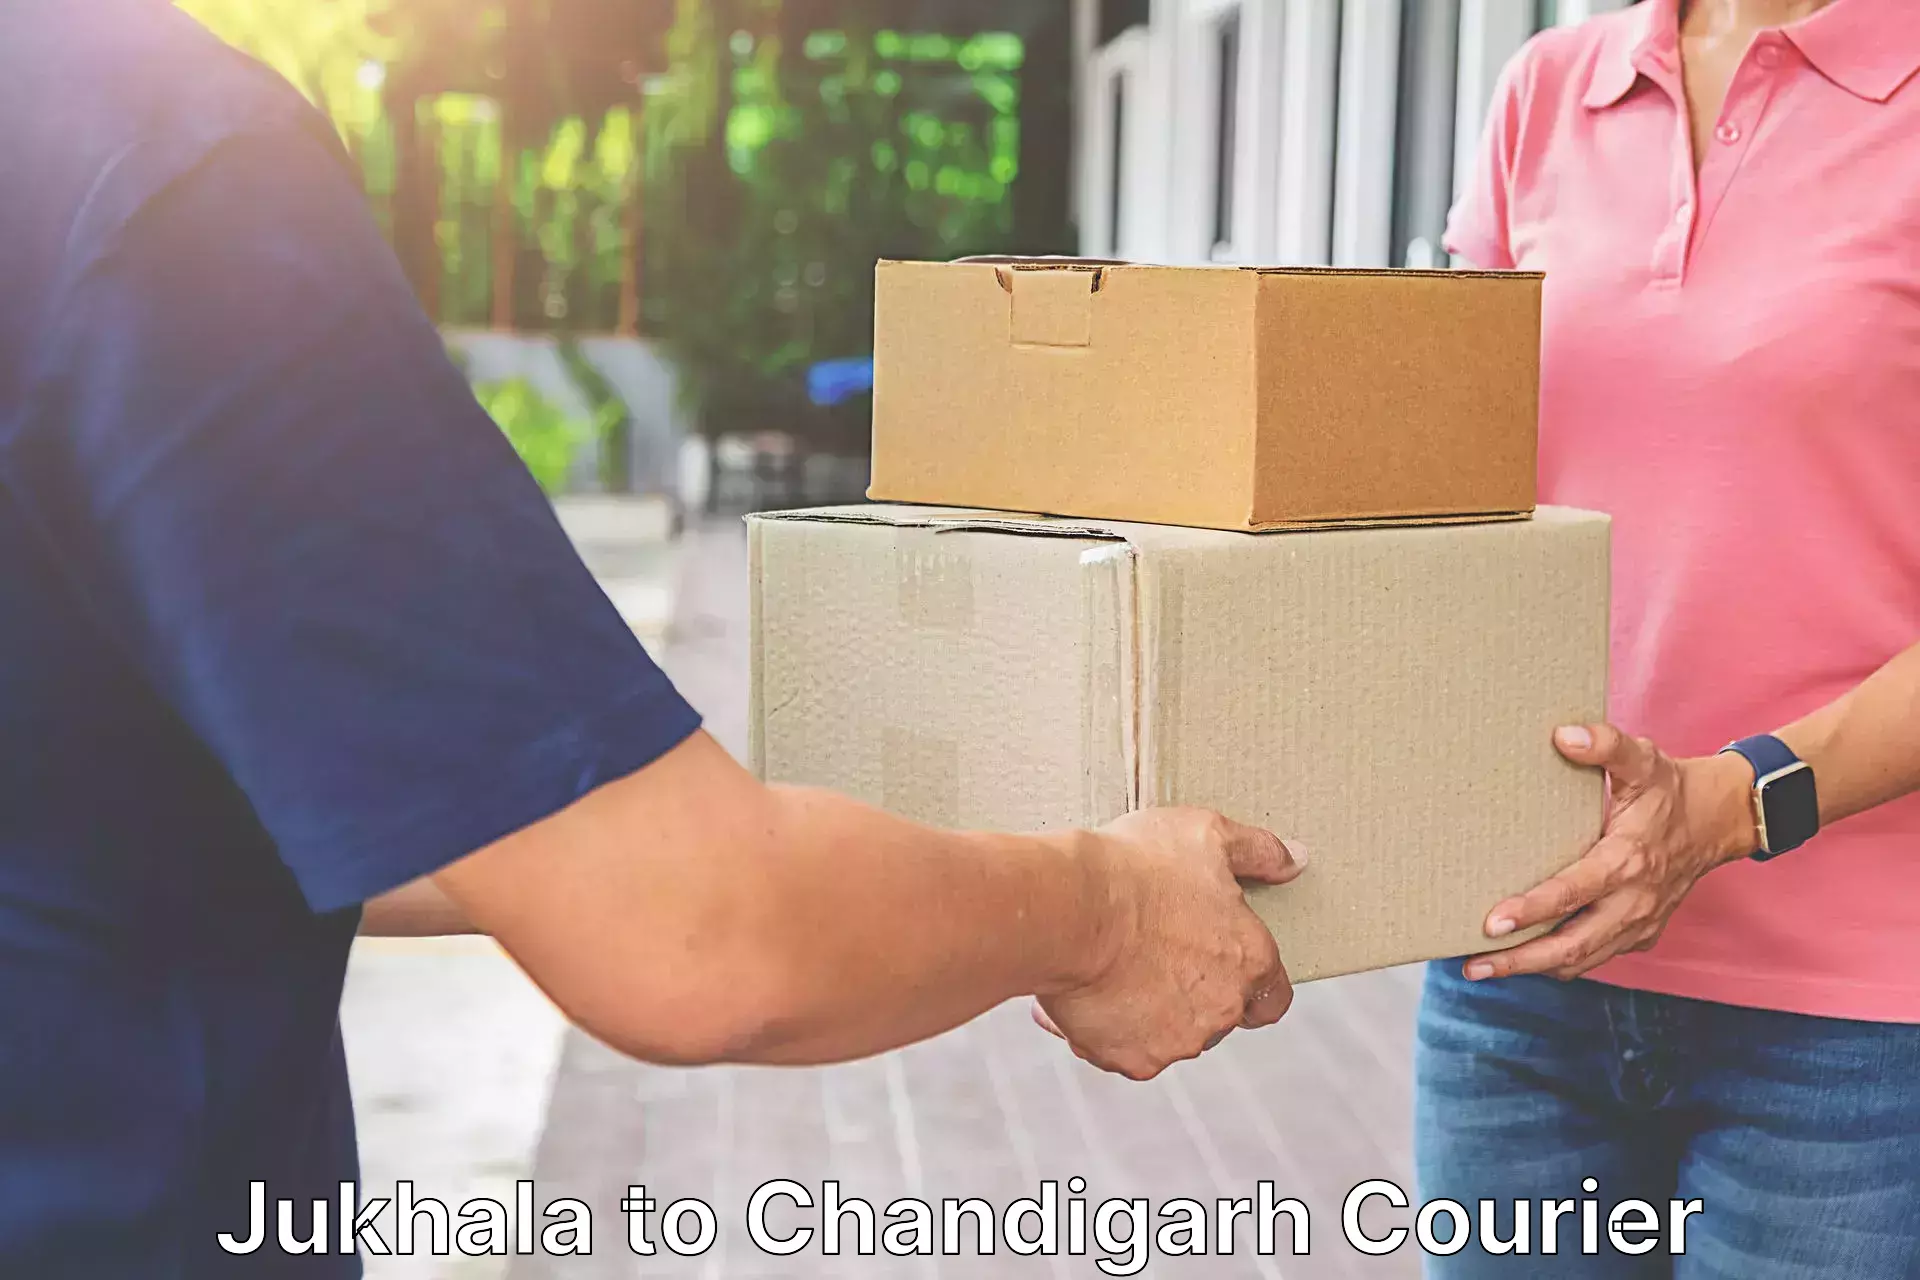 24-hour delivery options Jukhala to Chandigarh